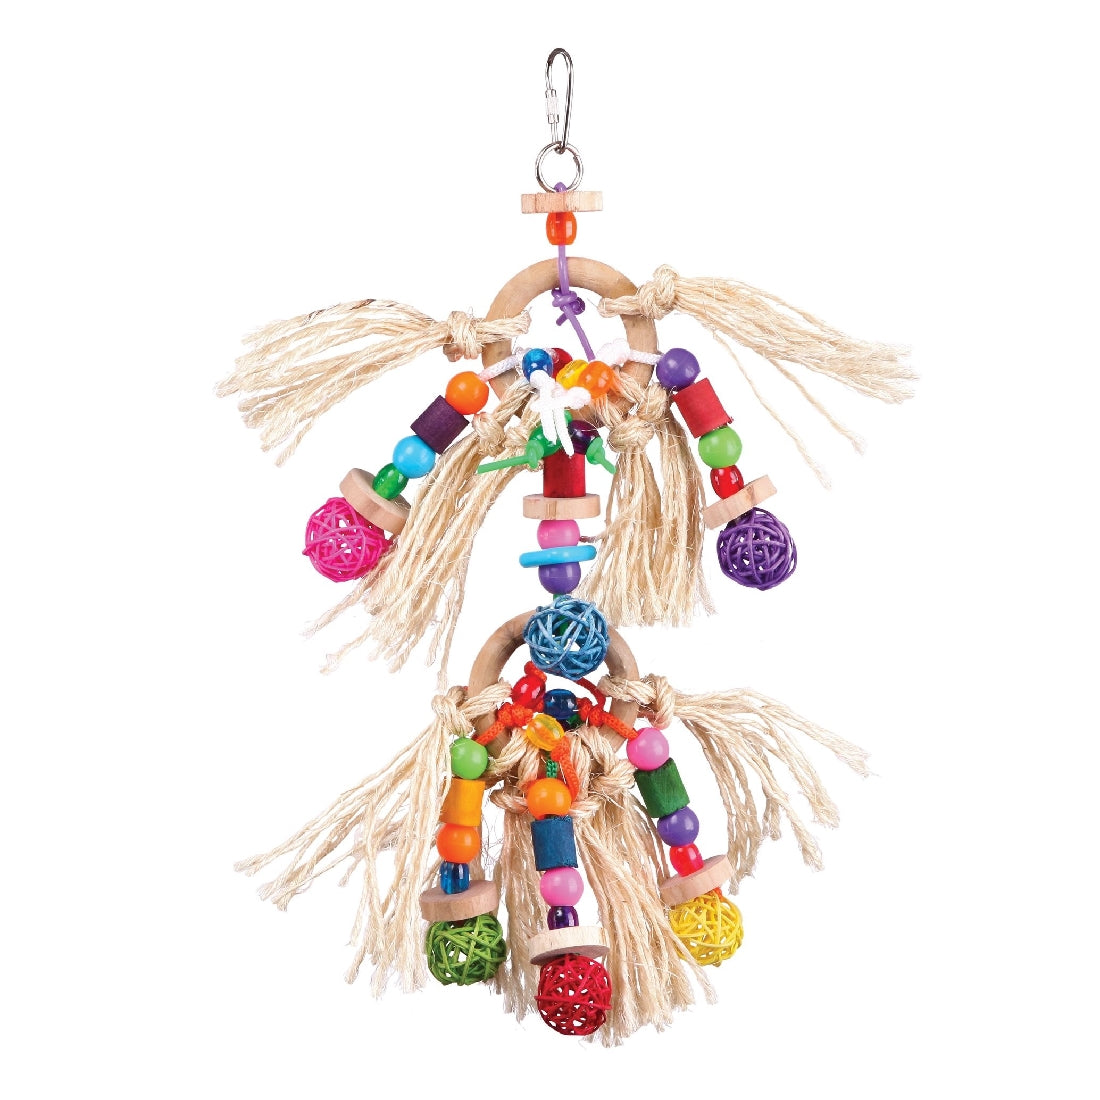 Colorful hanging bird toy with beads, ropes, and rattan balls.